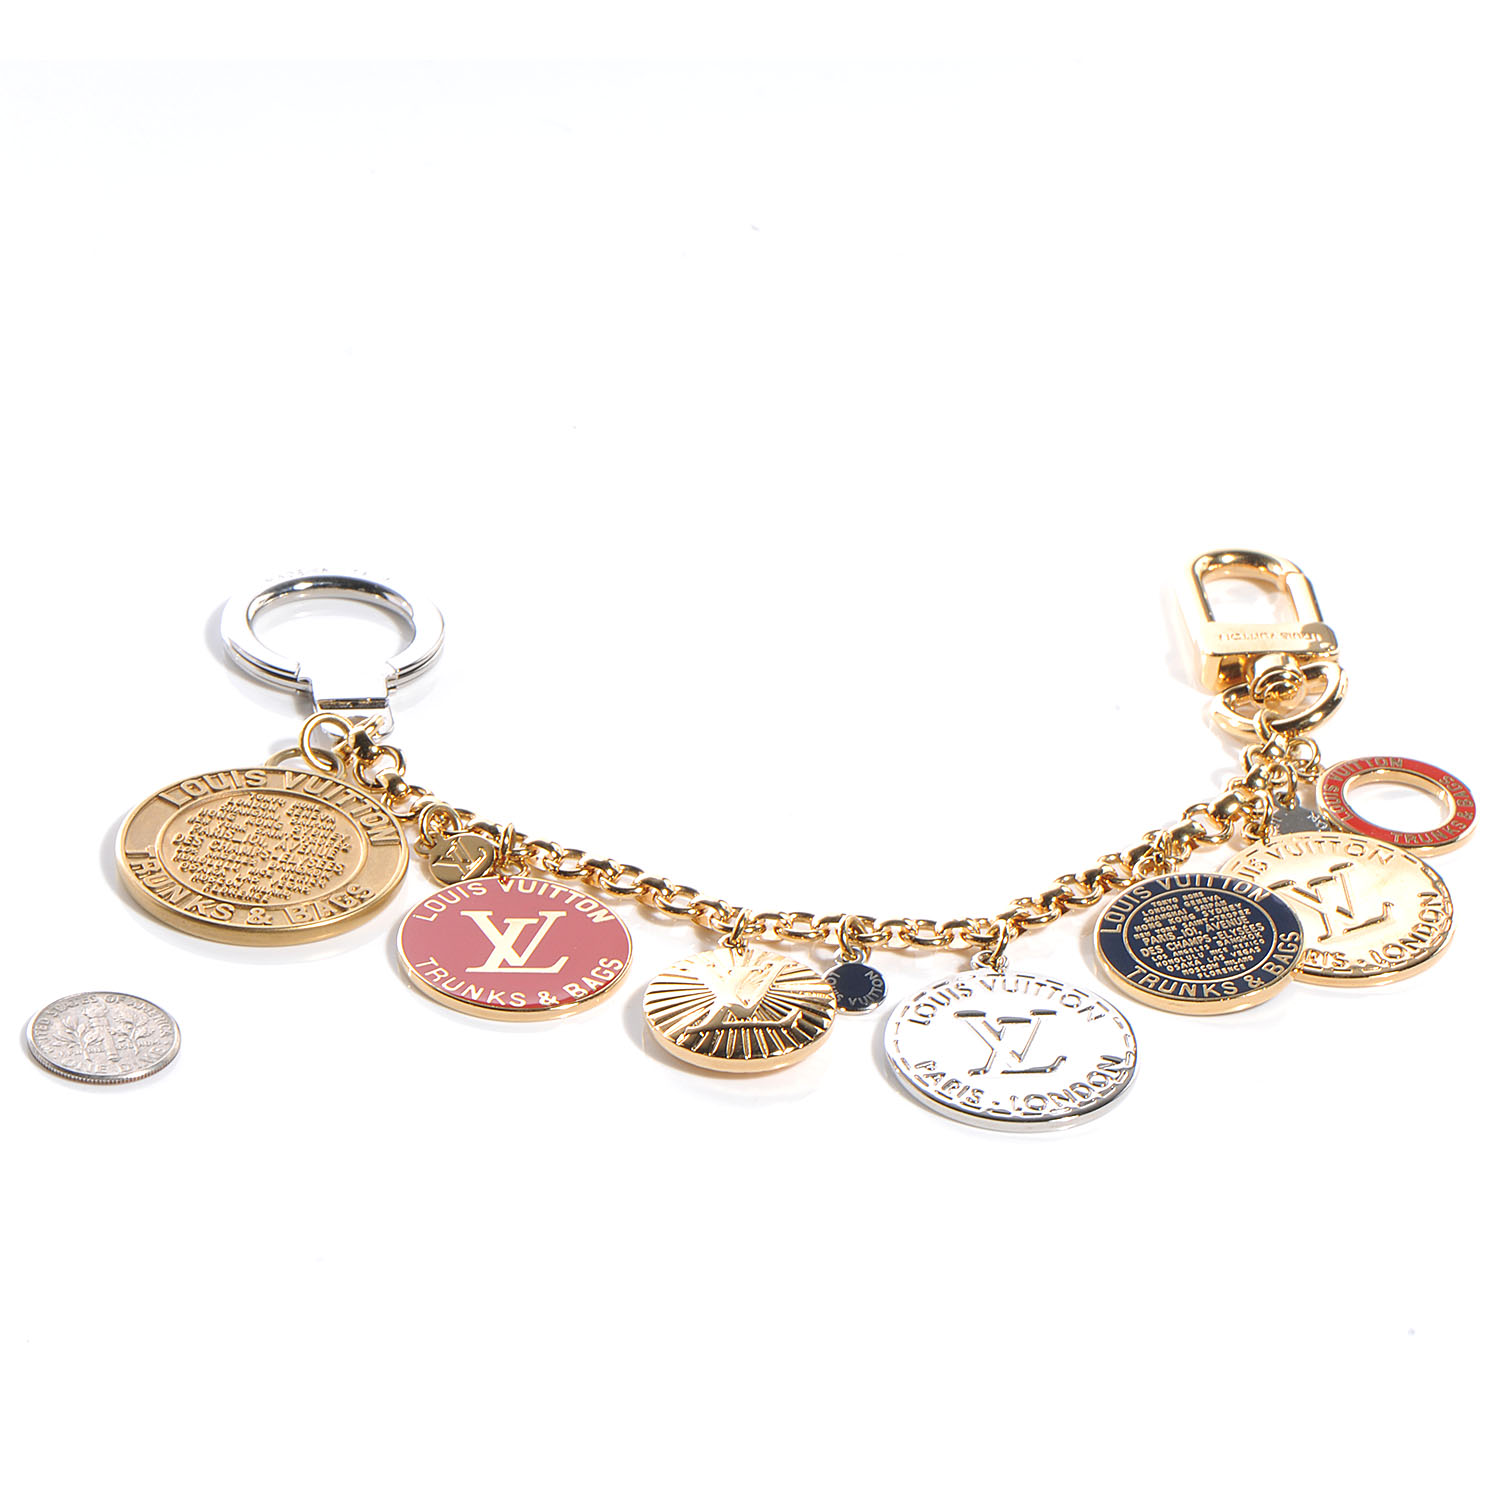 Louis Vuitton, Accessories, Globe Trunks And Bags Bag Charm